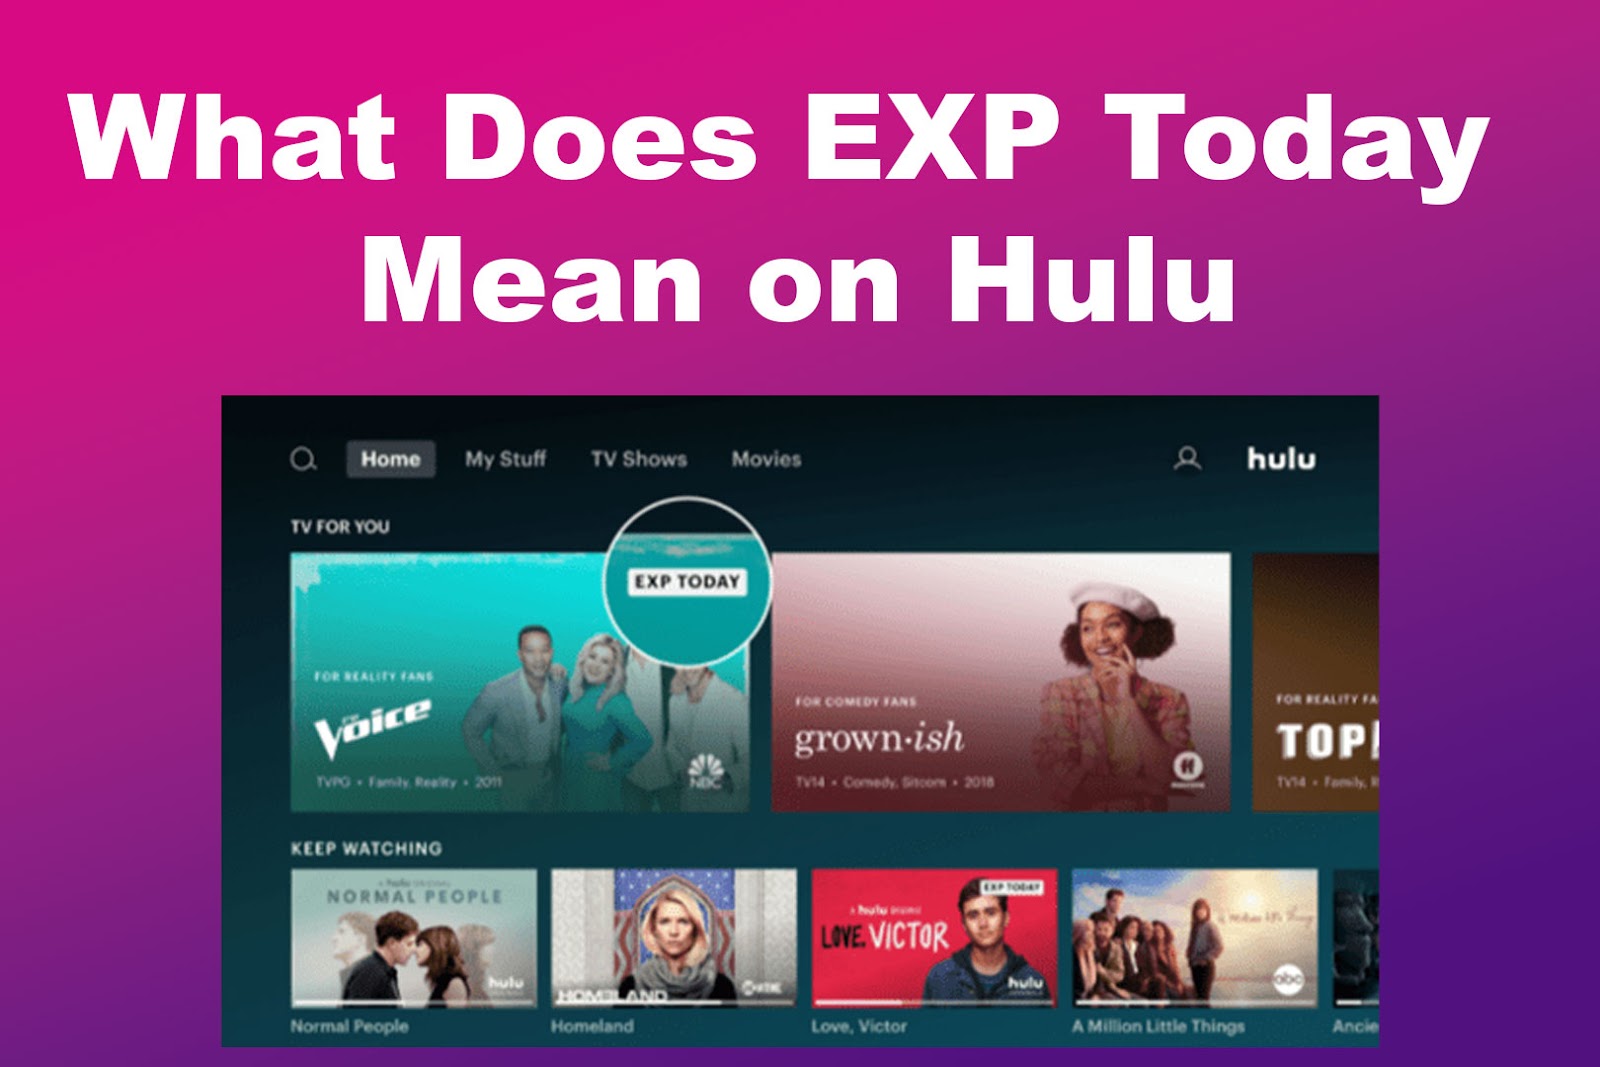 What Does EXP Today Mean on Hulu